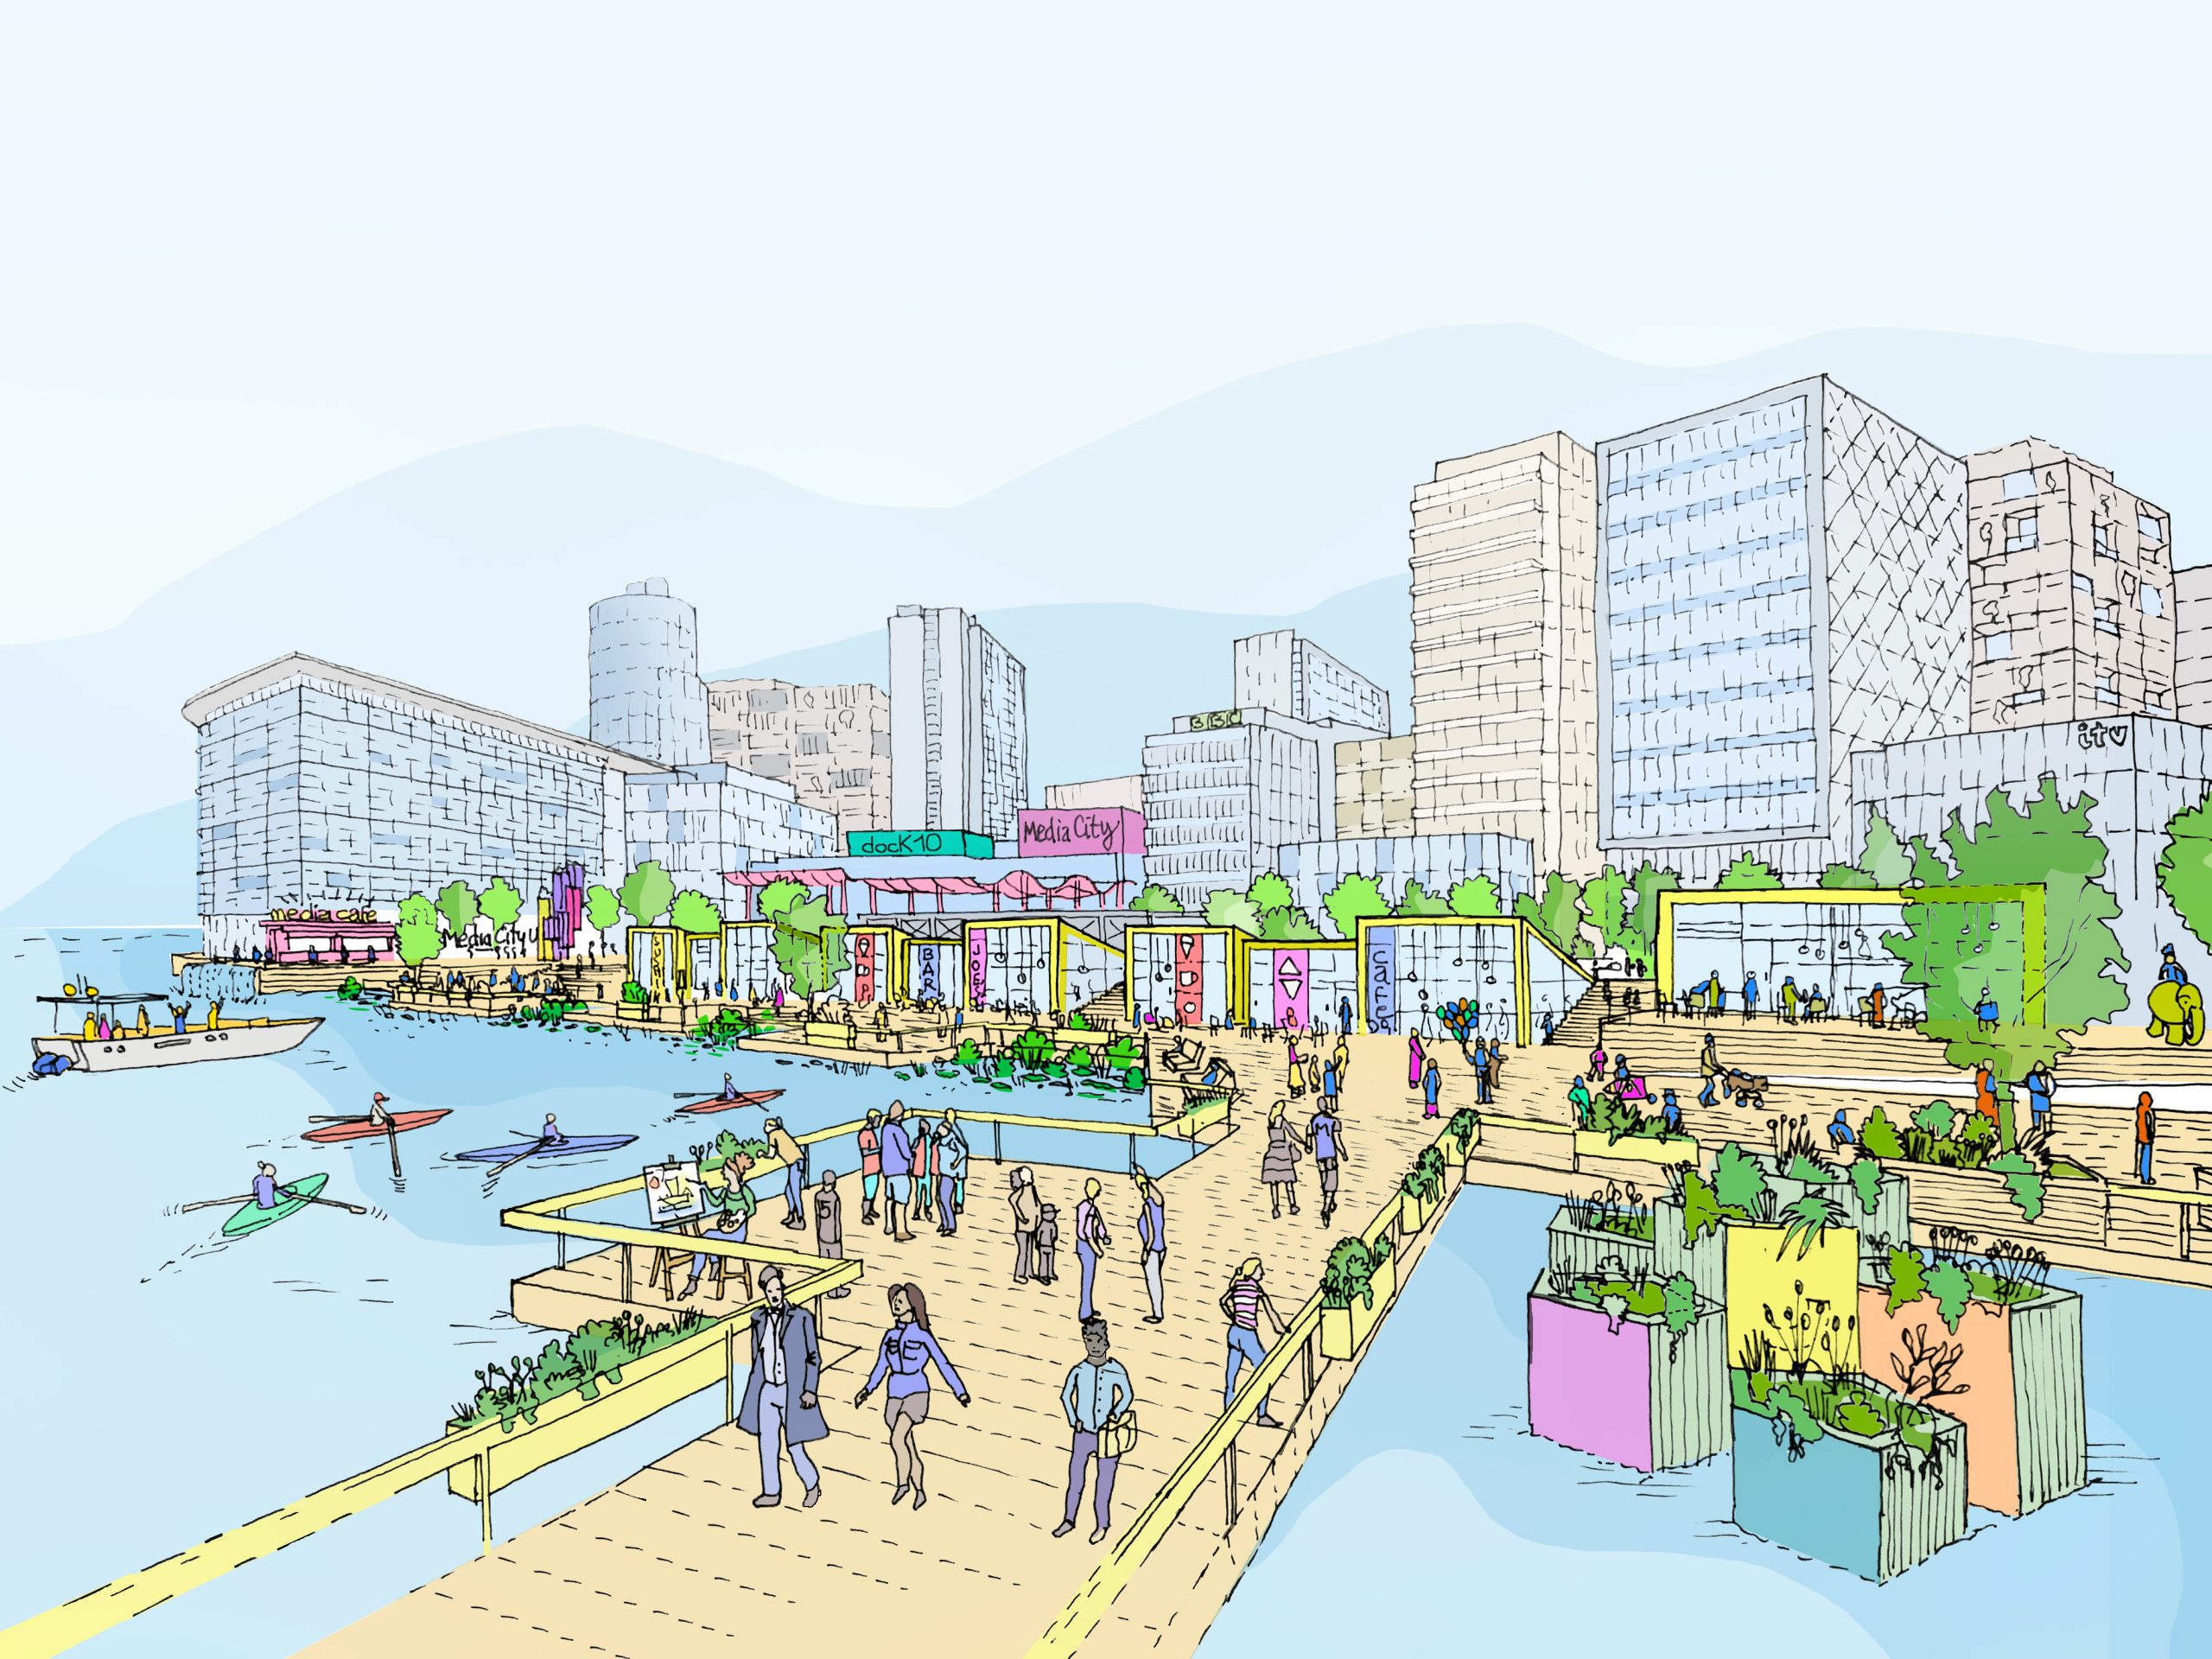 New plans approved to turn MediaCity into a "world class" waterfront destination